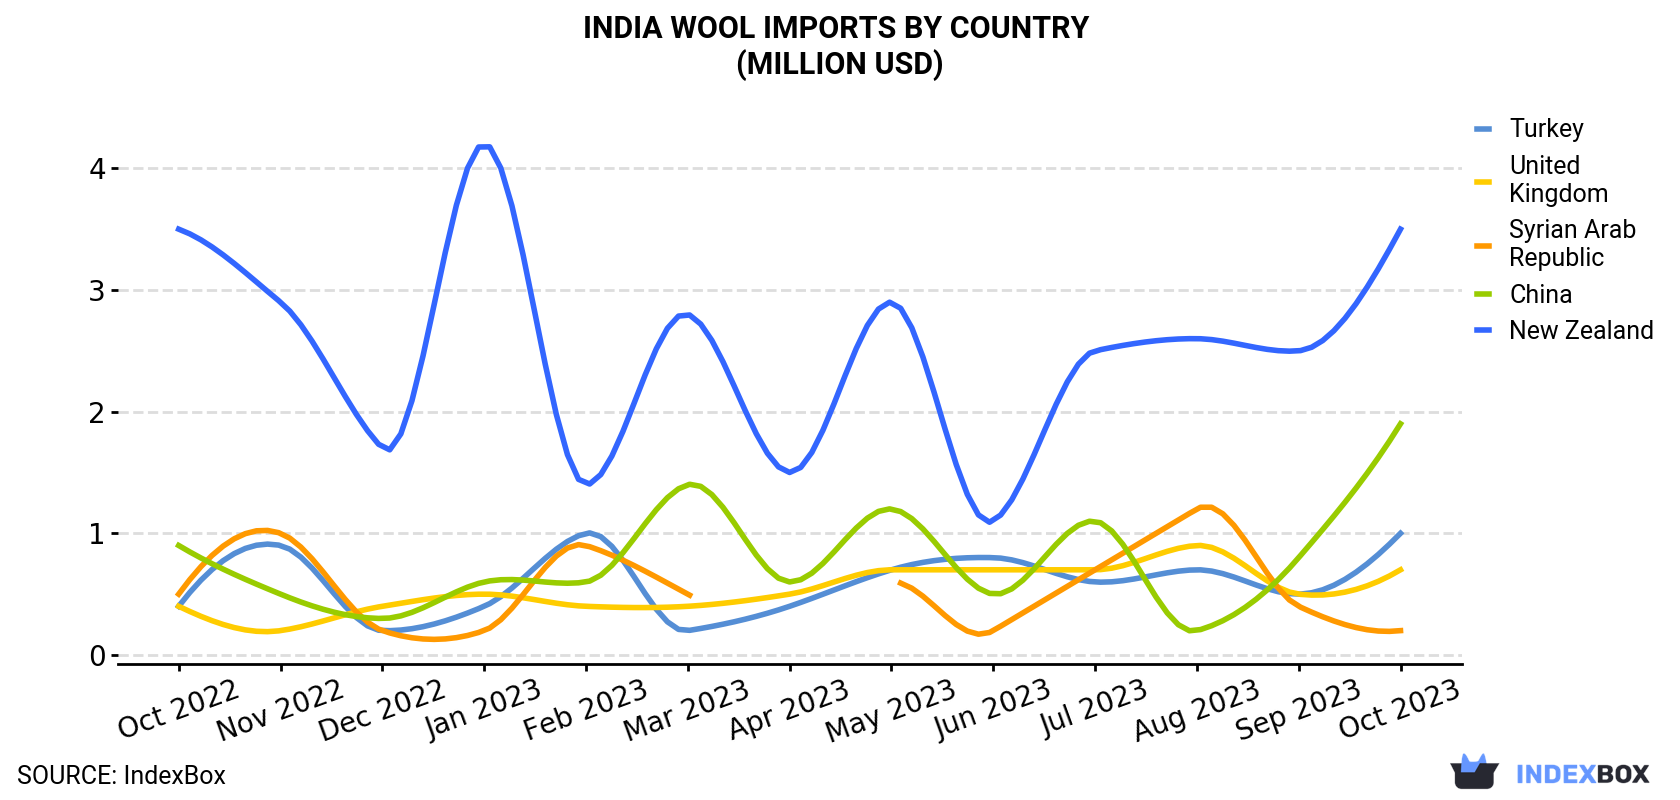 India Wool Imports By Country (Million USD)